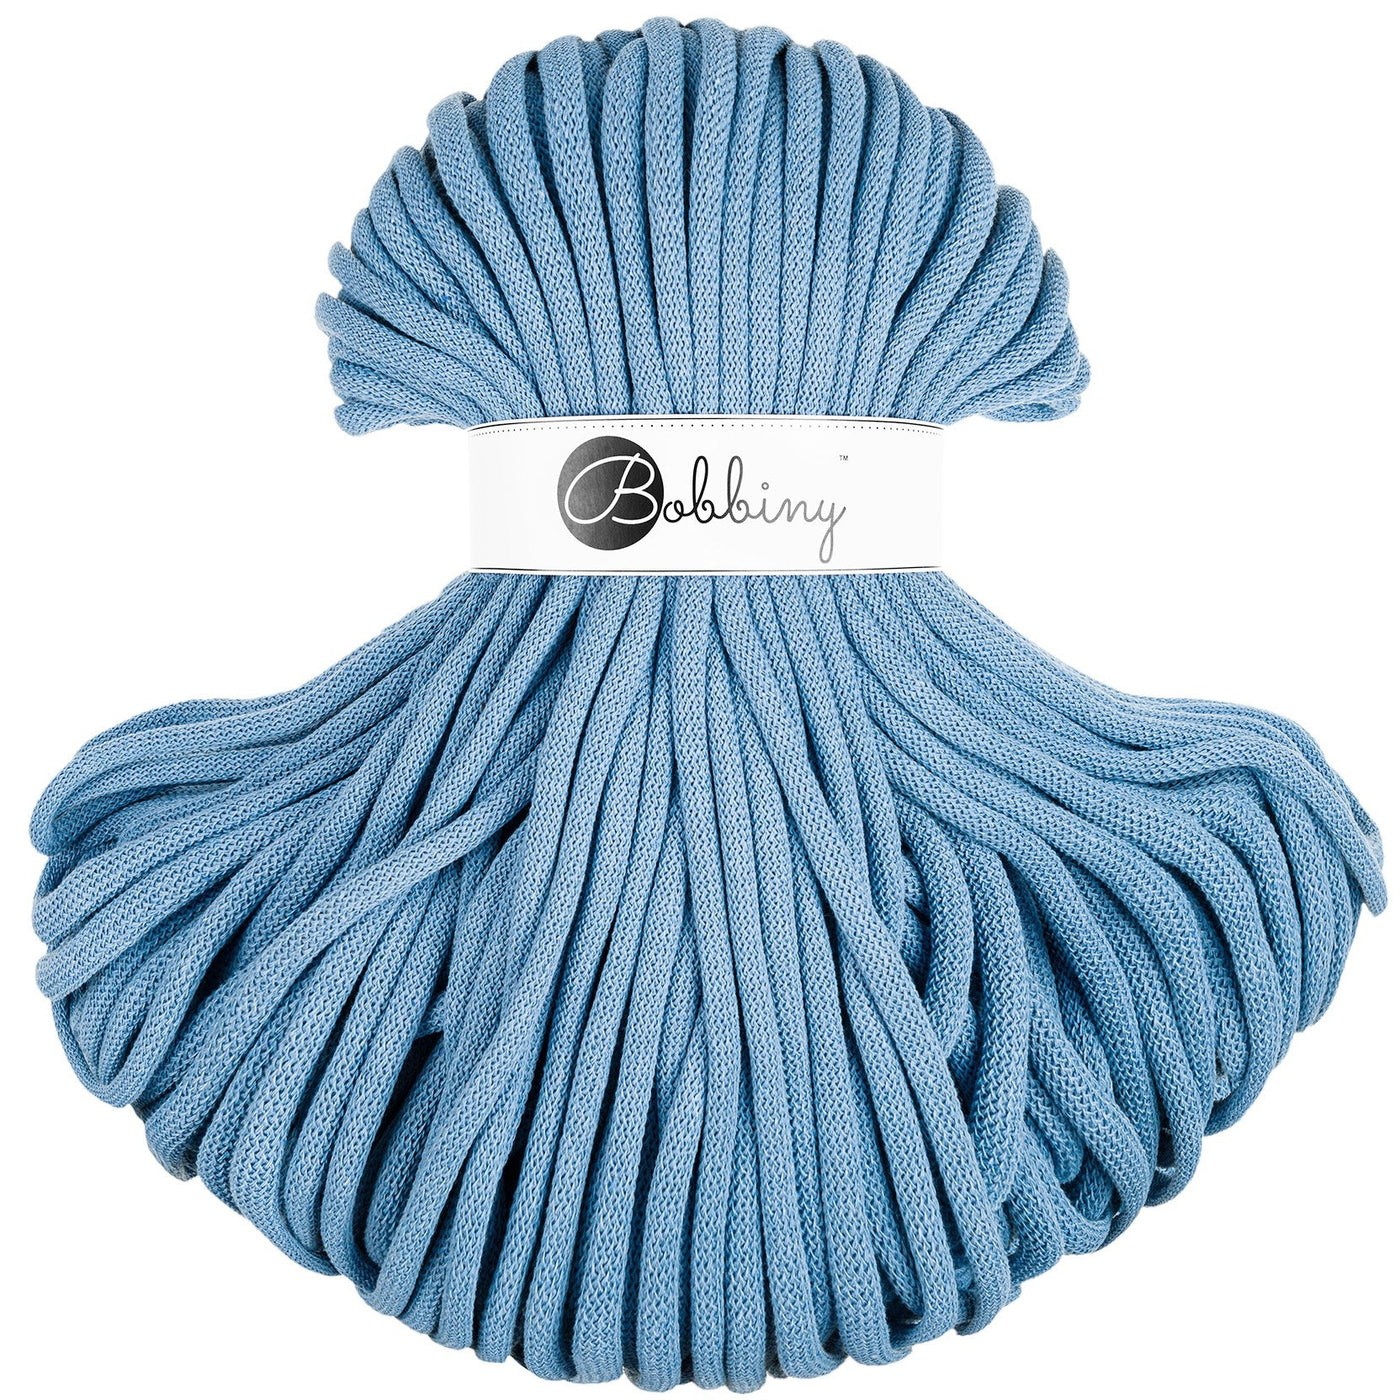 bobbiny braided cord in 9mm width in perfect blue shade